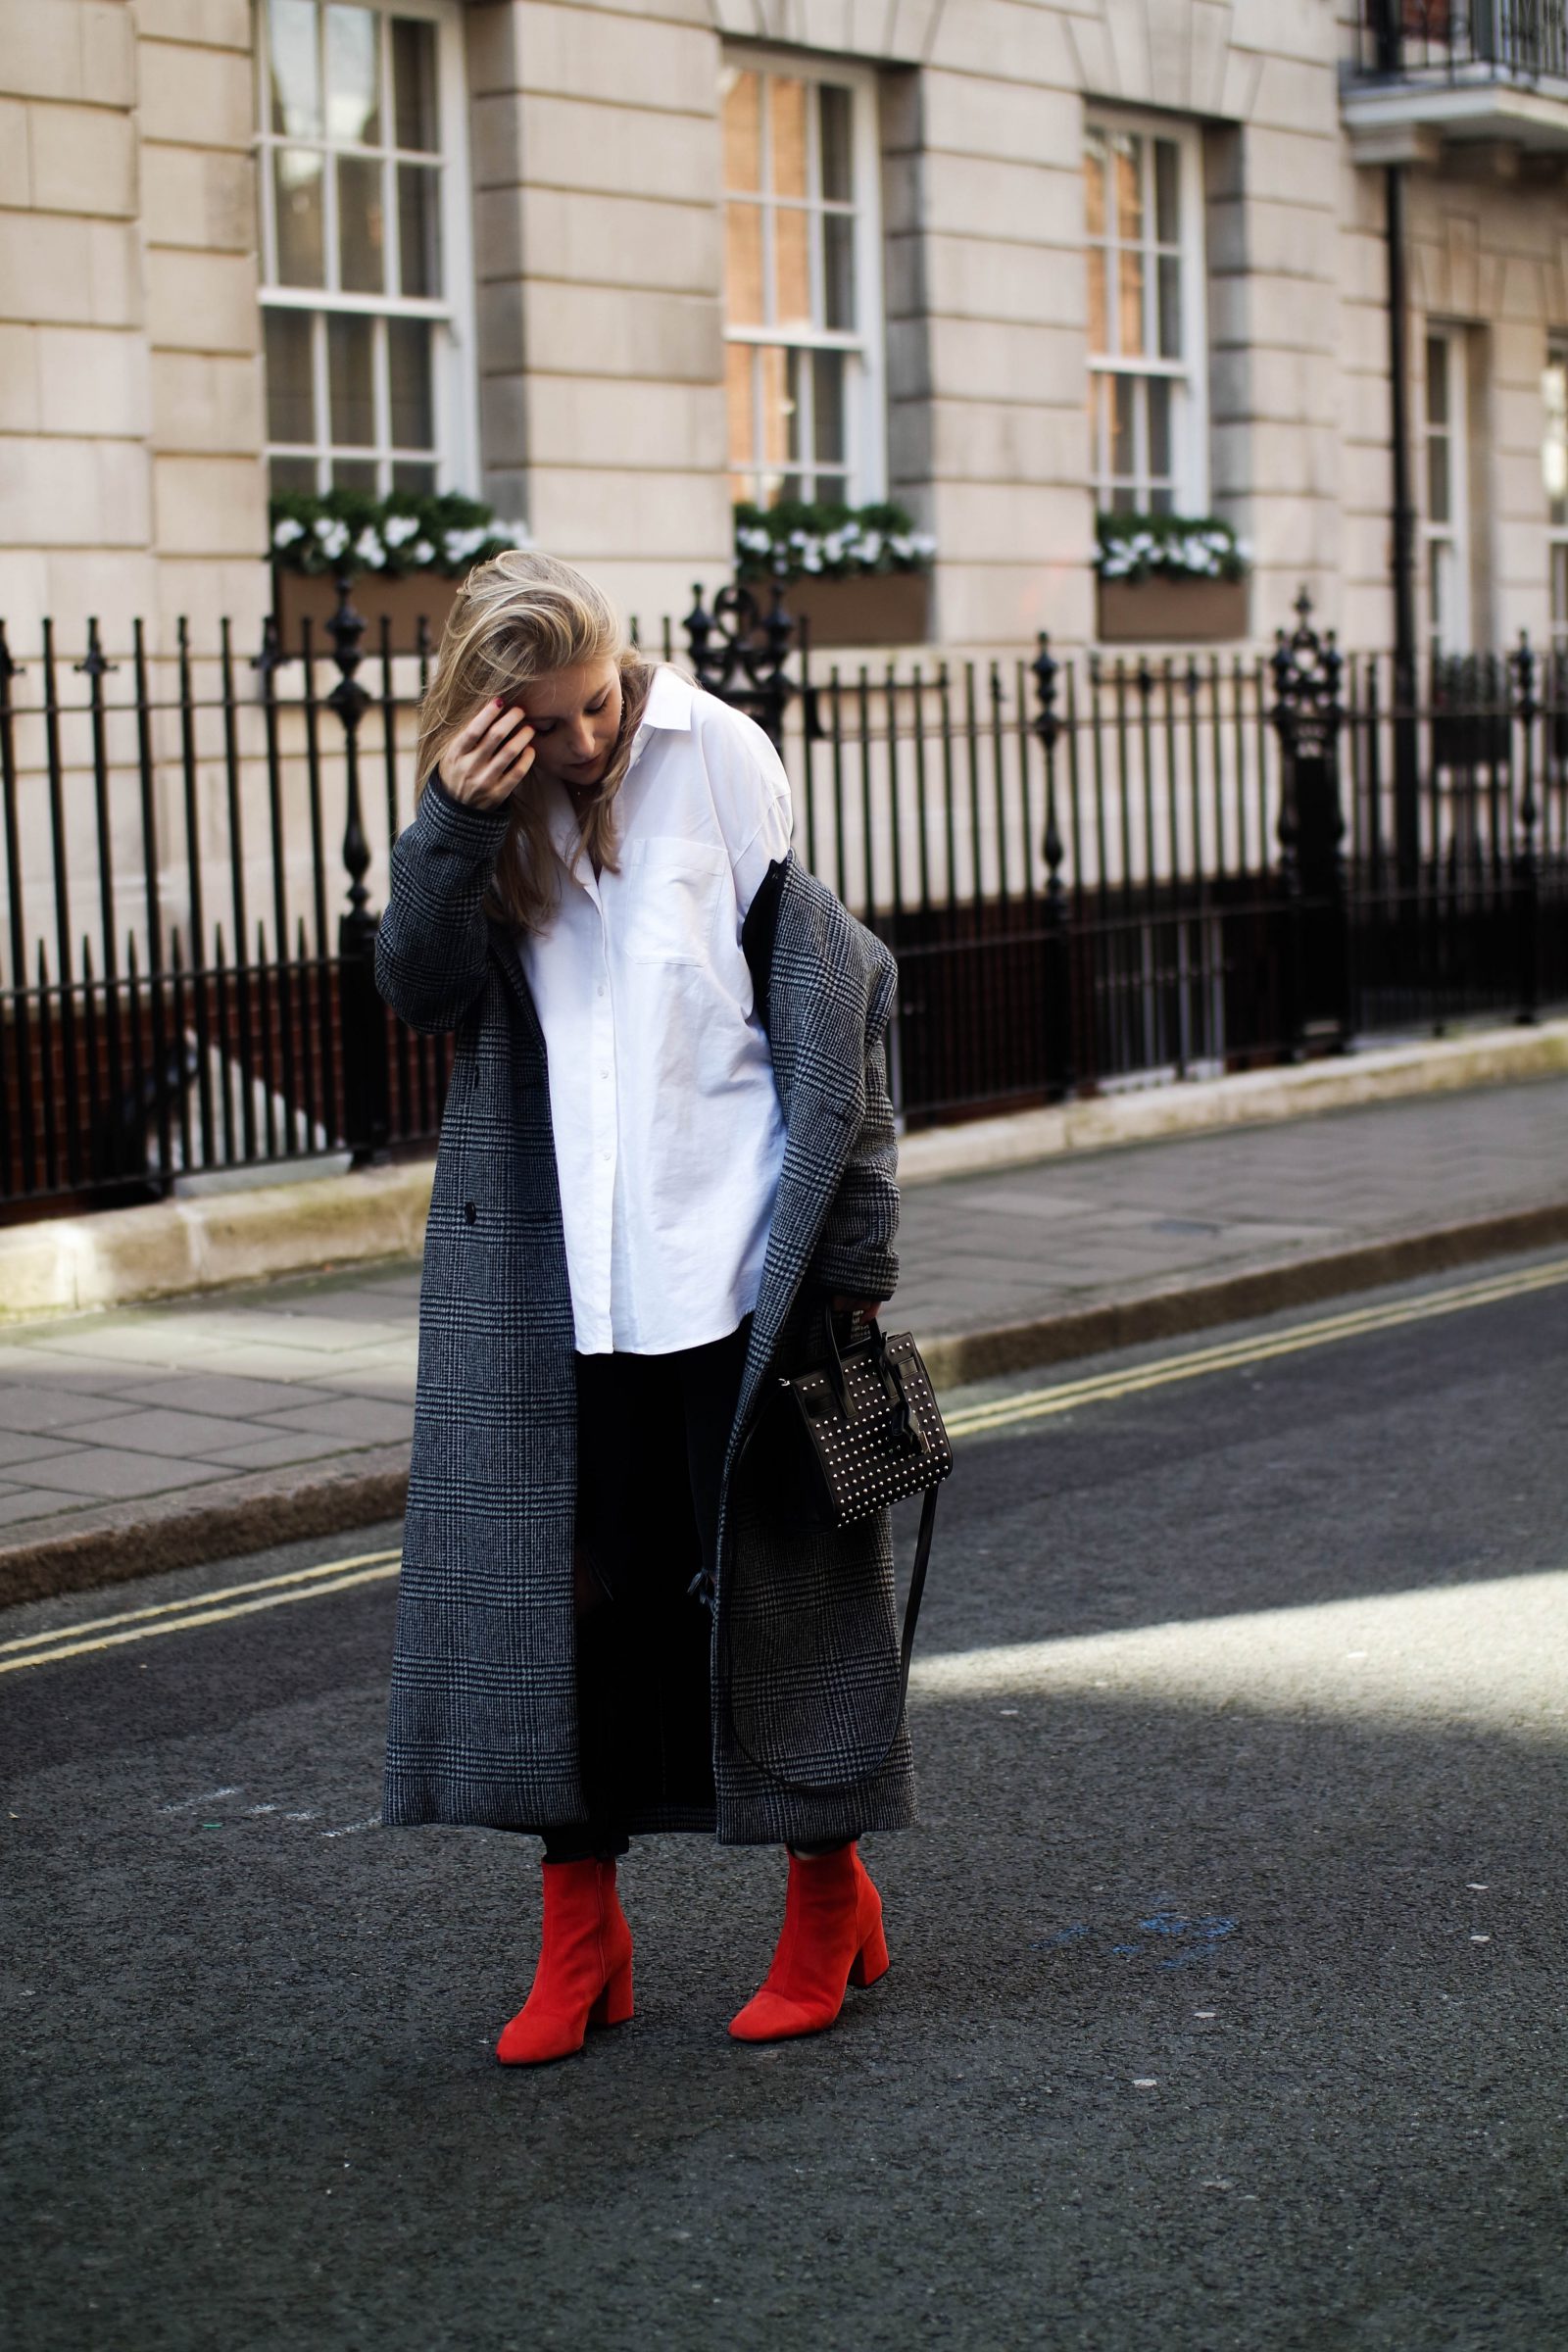 LFW Day 3 Keeping It Monochrome - Red Boots